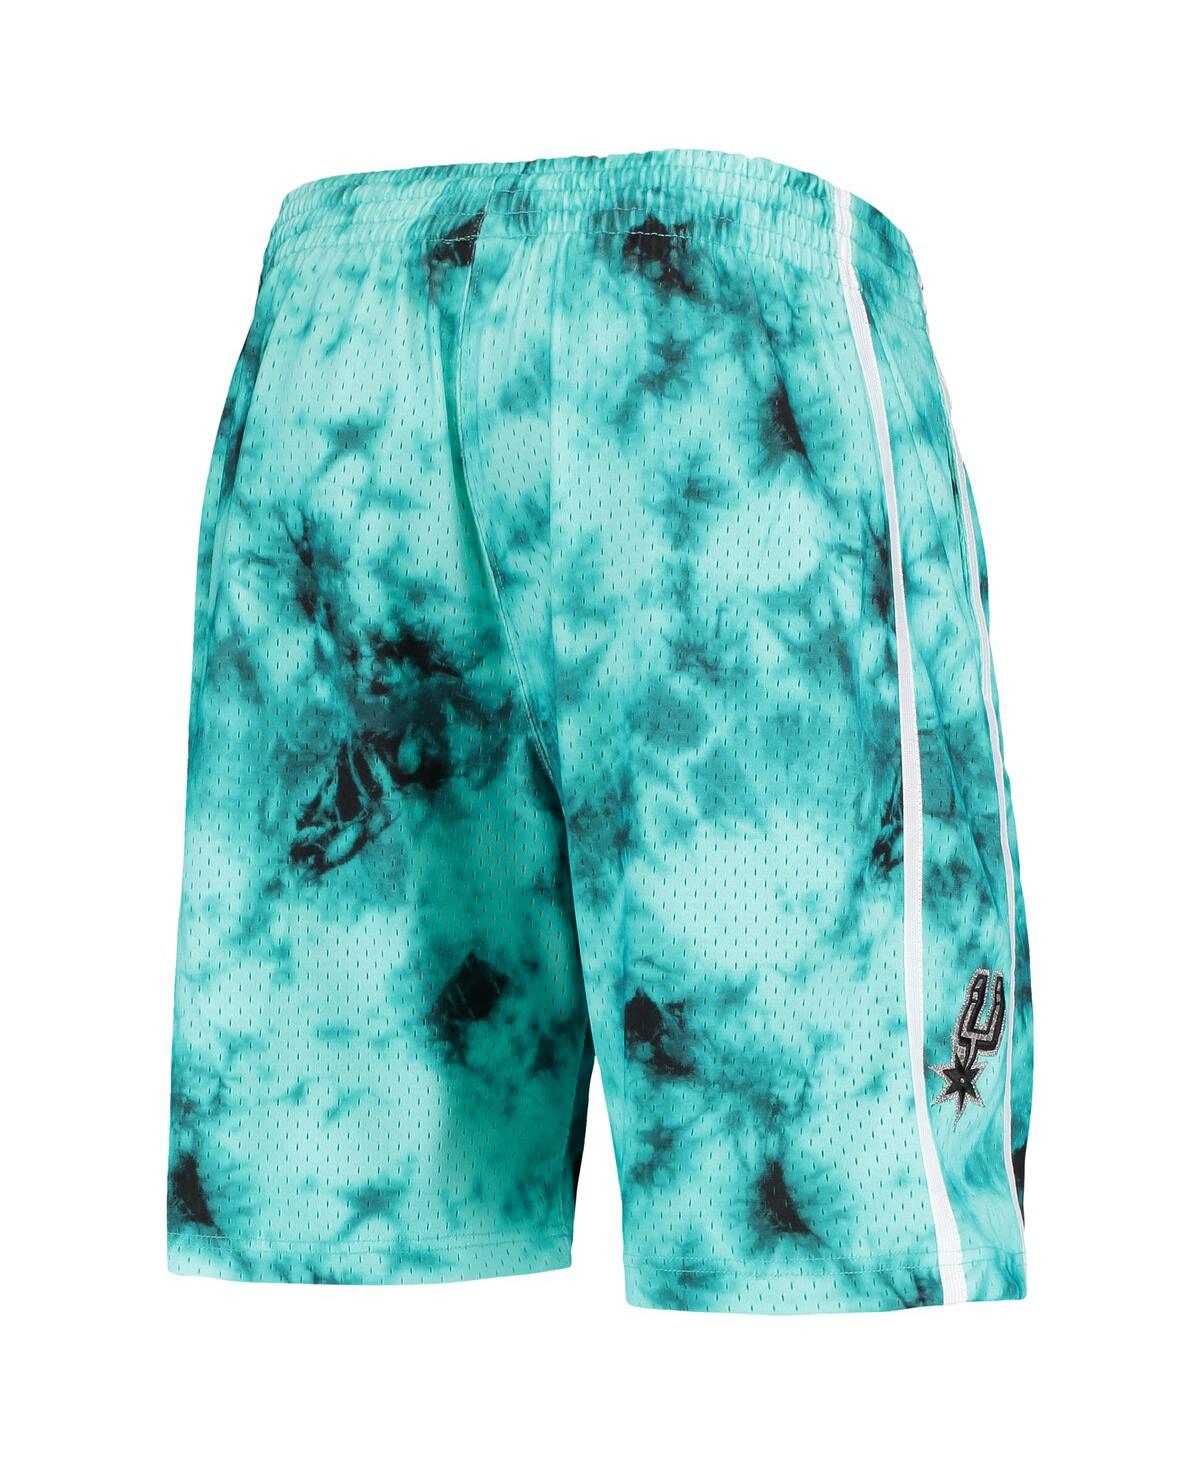 Mitchell & Ness Men's Vancouver Grizzlies Reload Collection Swingman Shorts  - Macy's